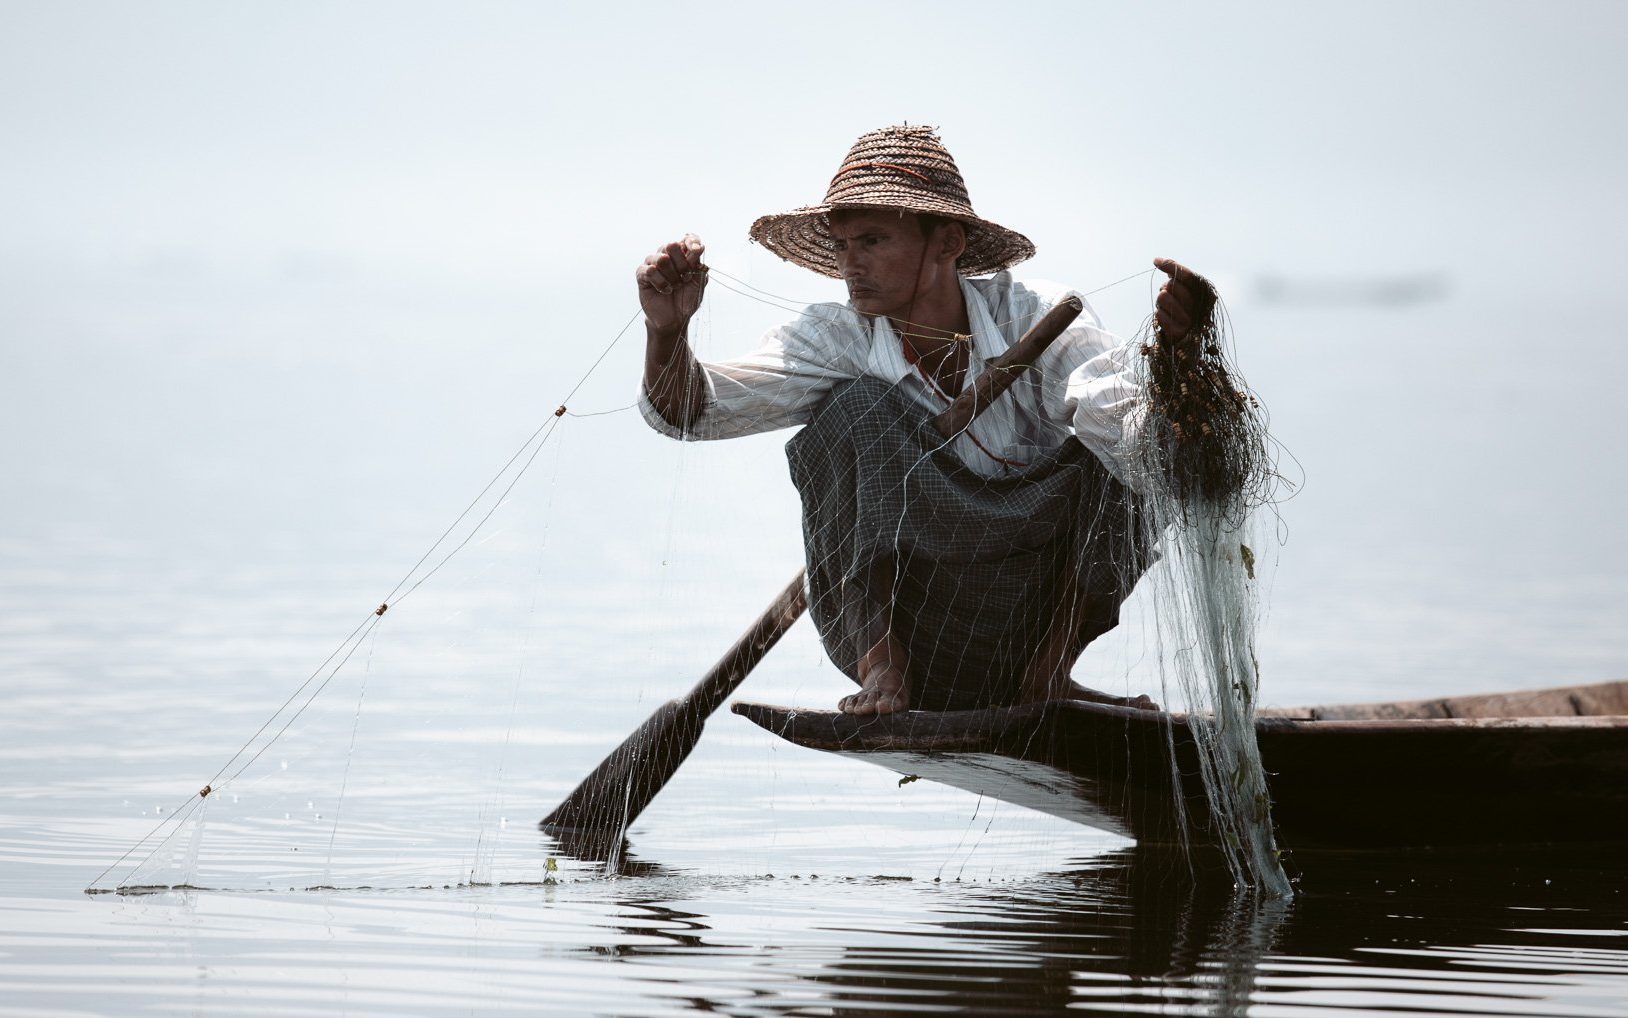 HOW TO GET TO INLE LAKE, MYANMAR